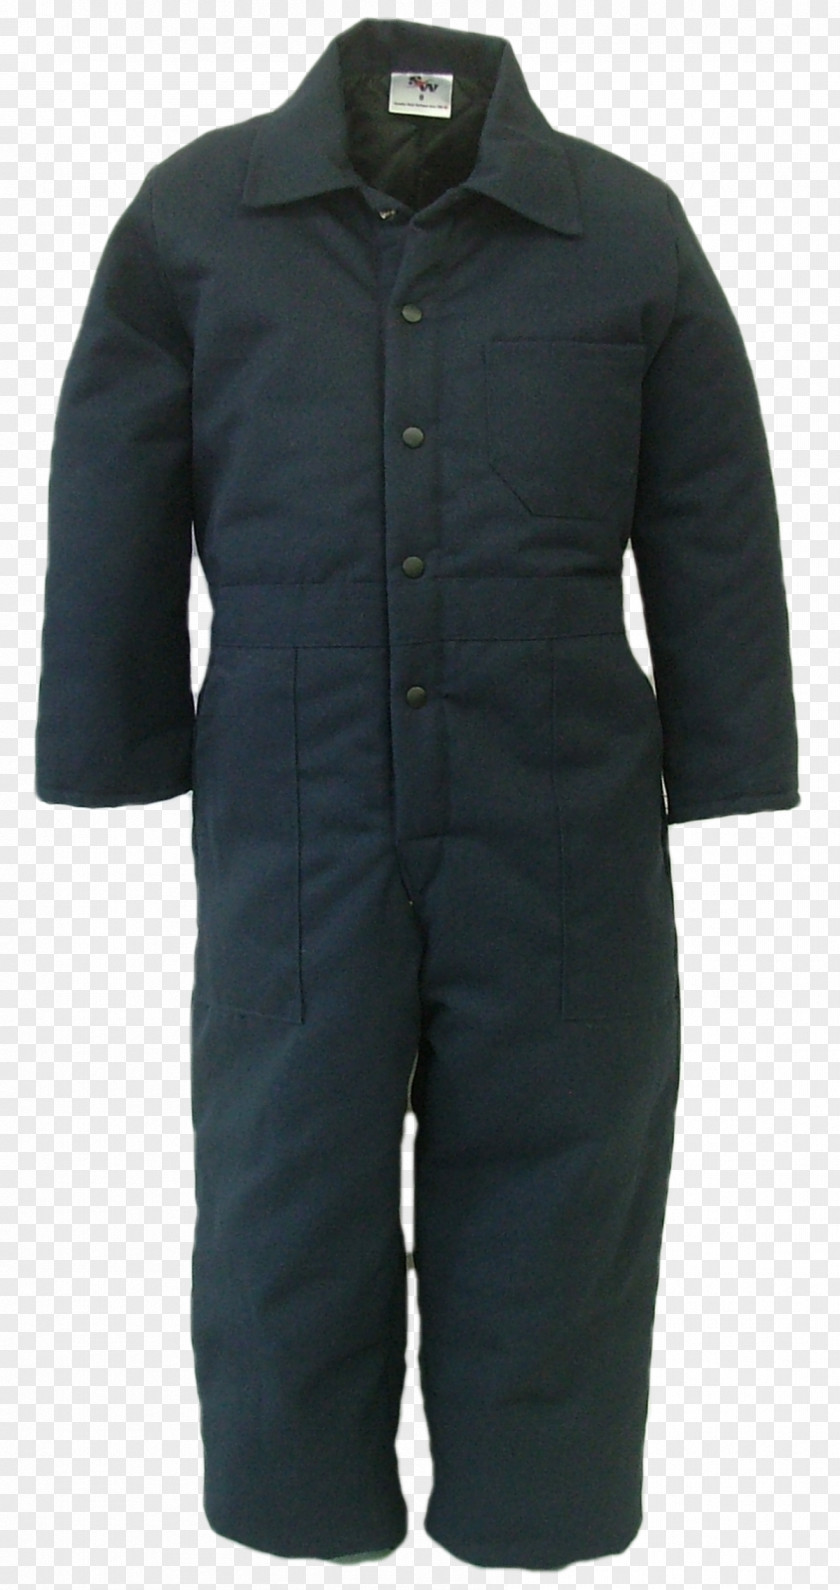 Jacket Sleeve Coat Overall Lining PNG